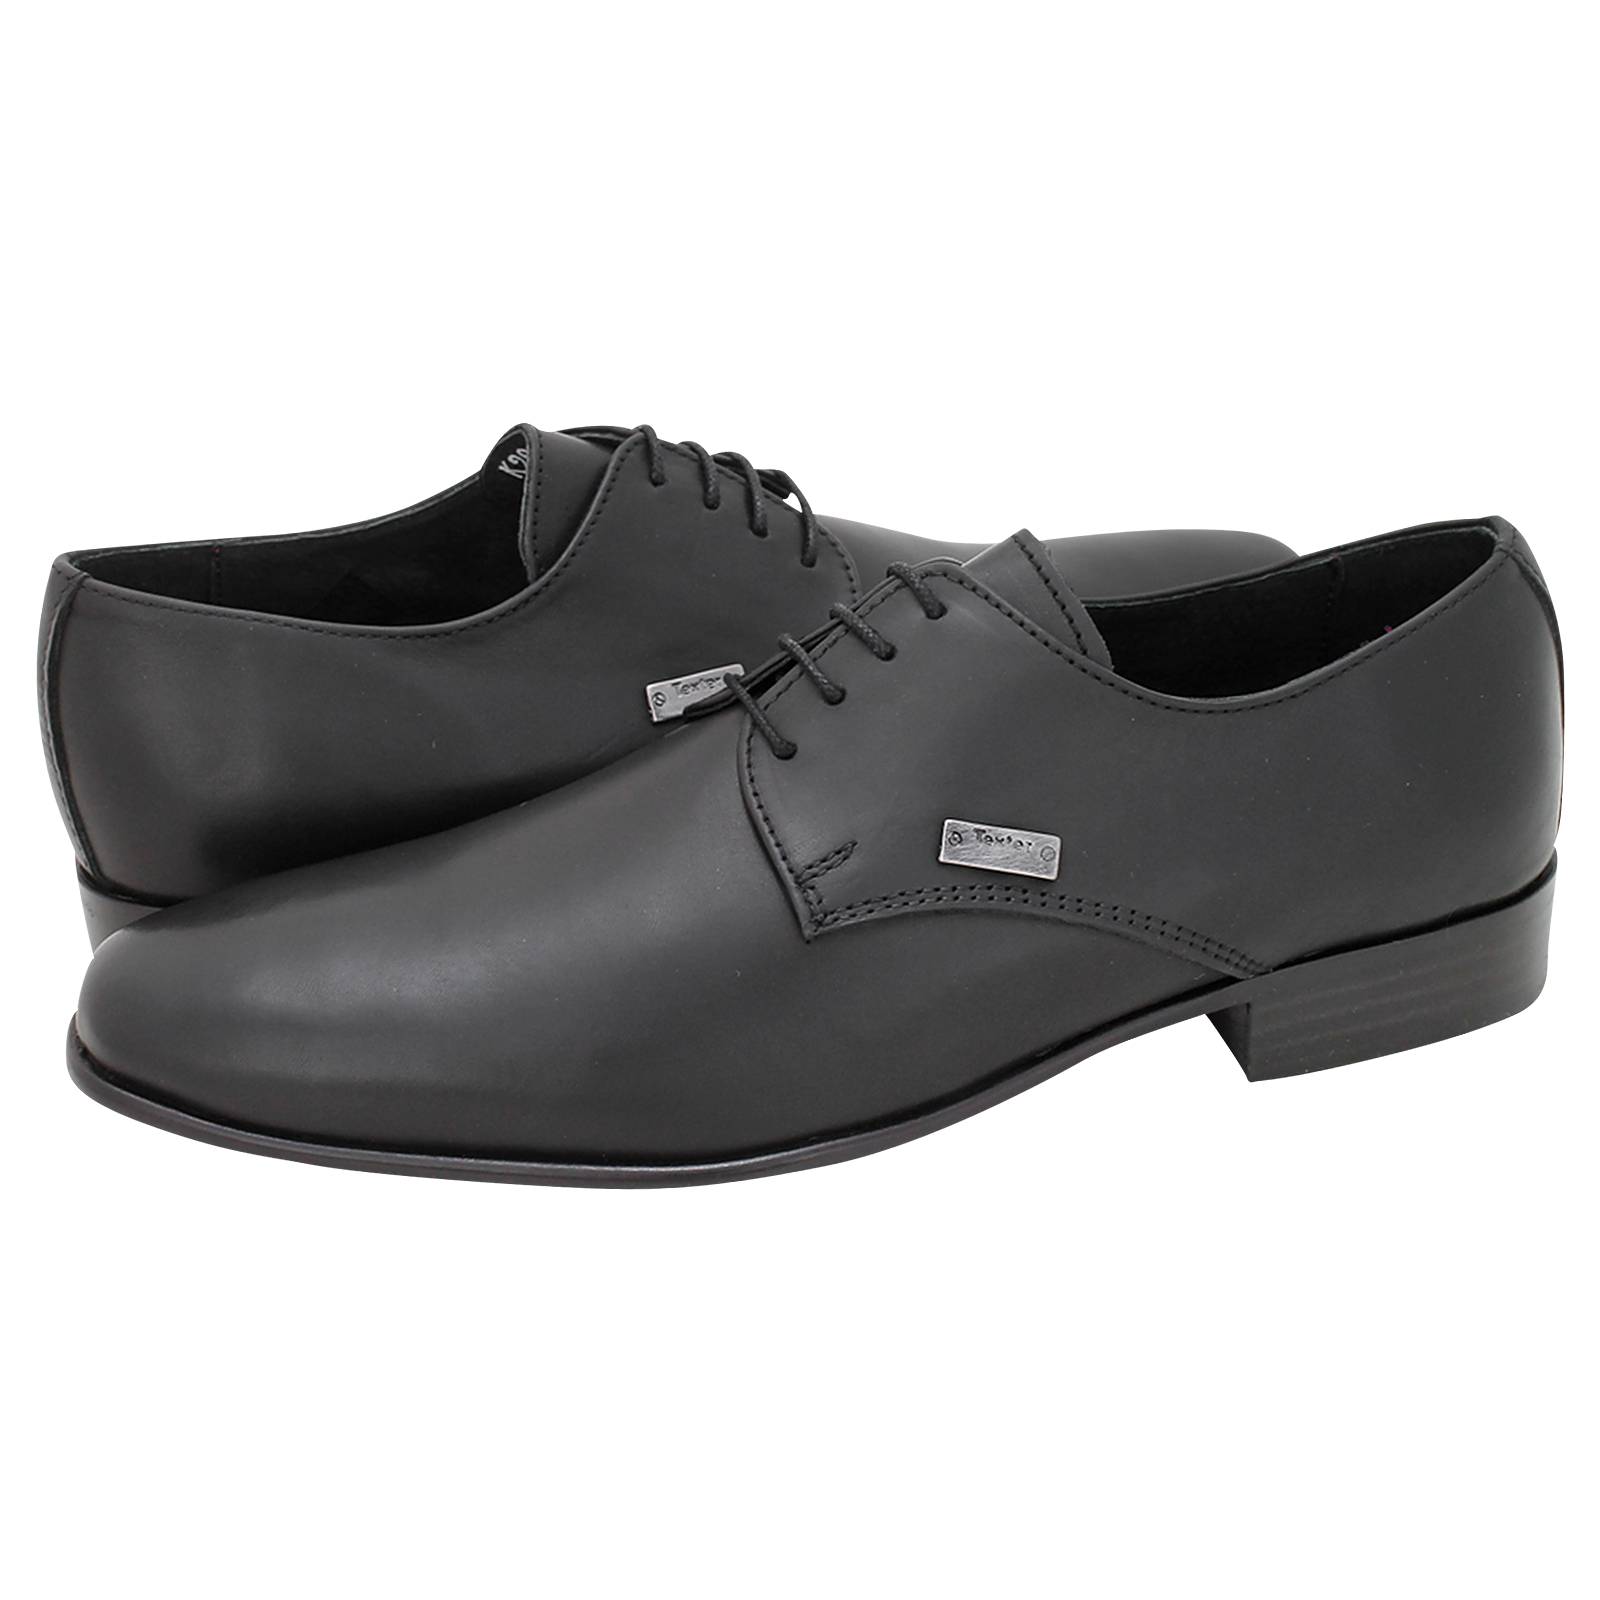 Sapkyo - Texter Men's lace-up shoes made of leather - Gianna Kazakou Online